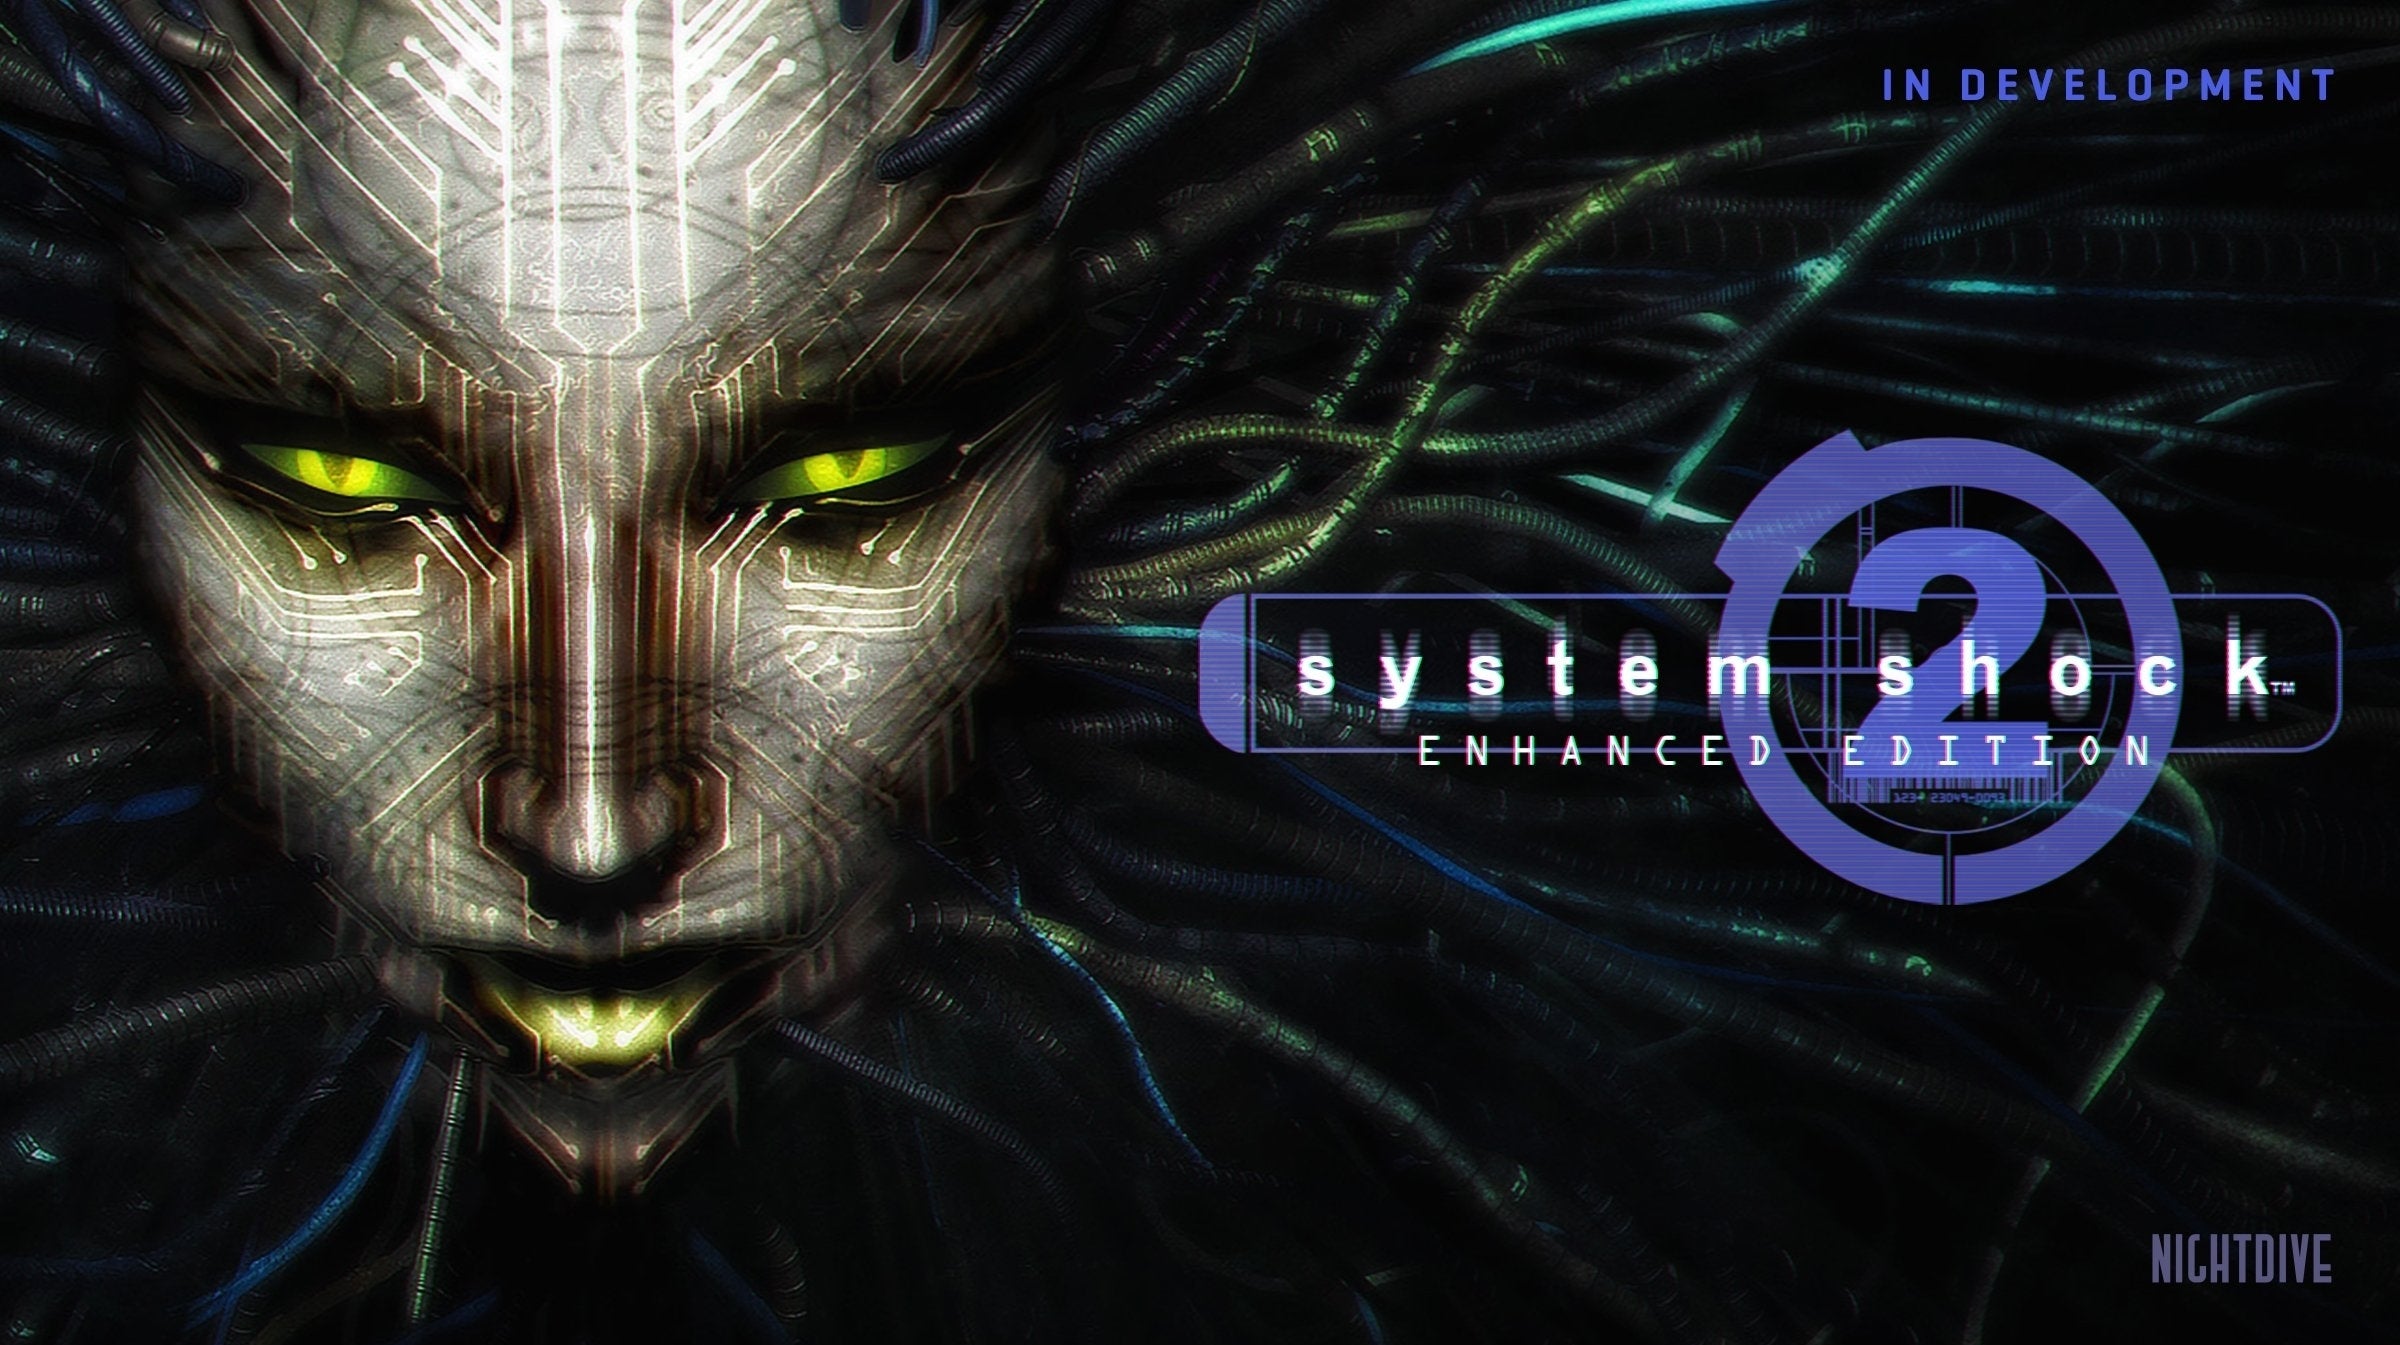 Image for Nightdive Studios announces System Shock 2 Enhanced Edition